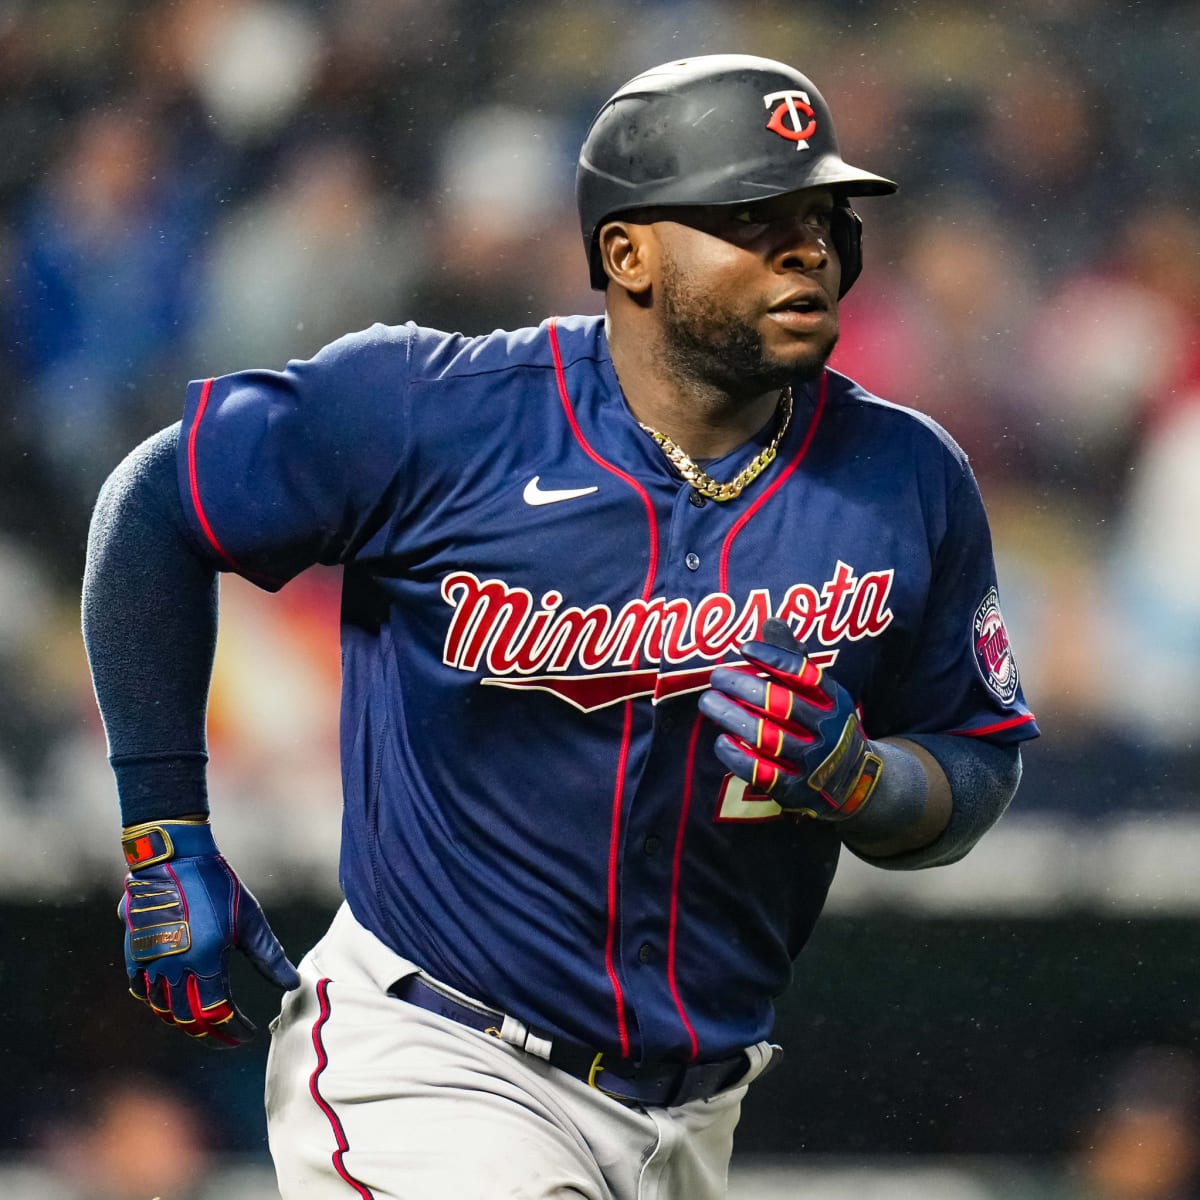 Minnesota Twins activate Miguel Sano upon return from knee surgery - ESPN